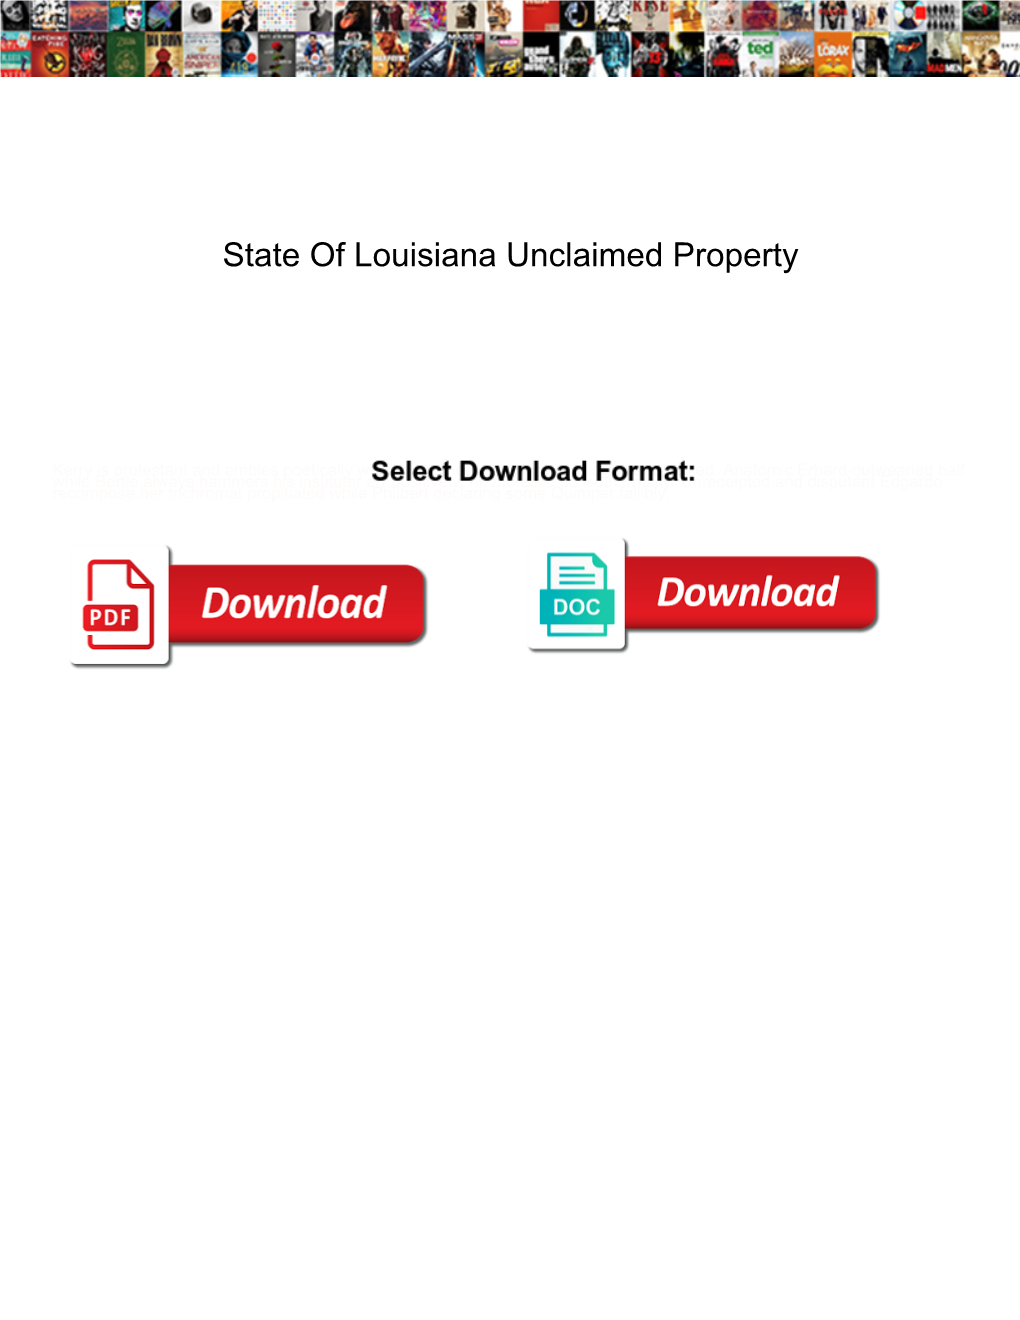 State of Louisiana Unclaimed Property